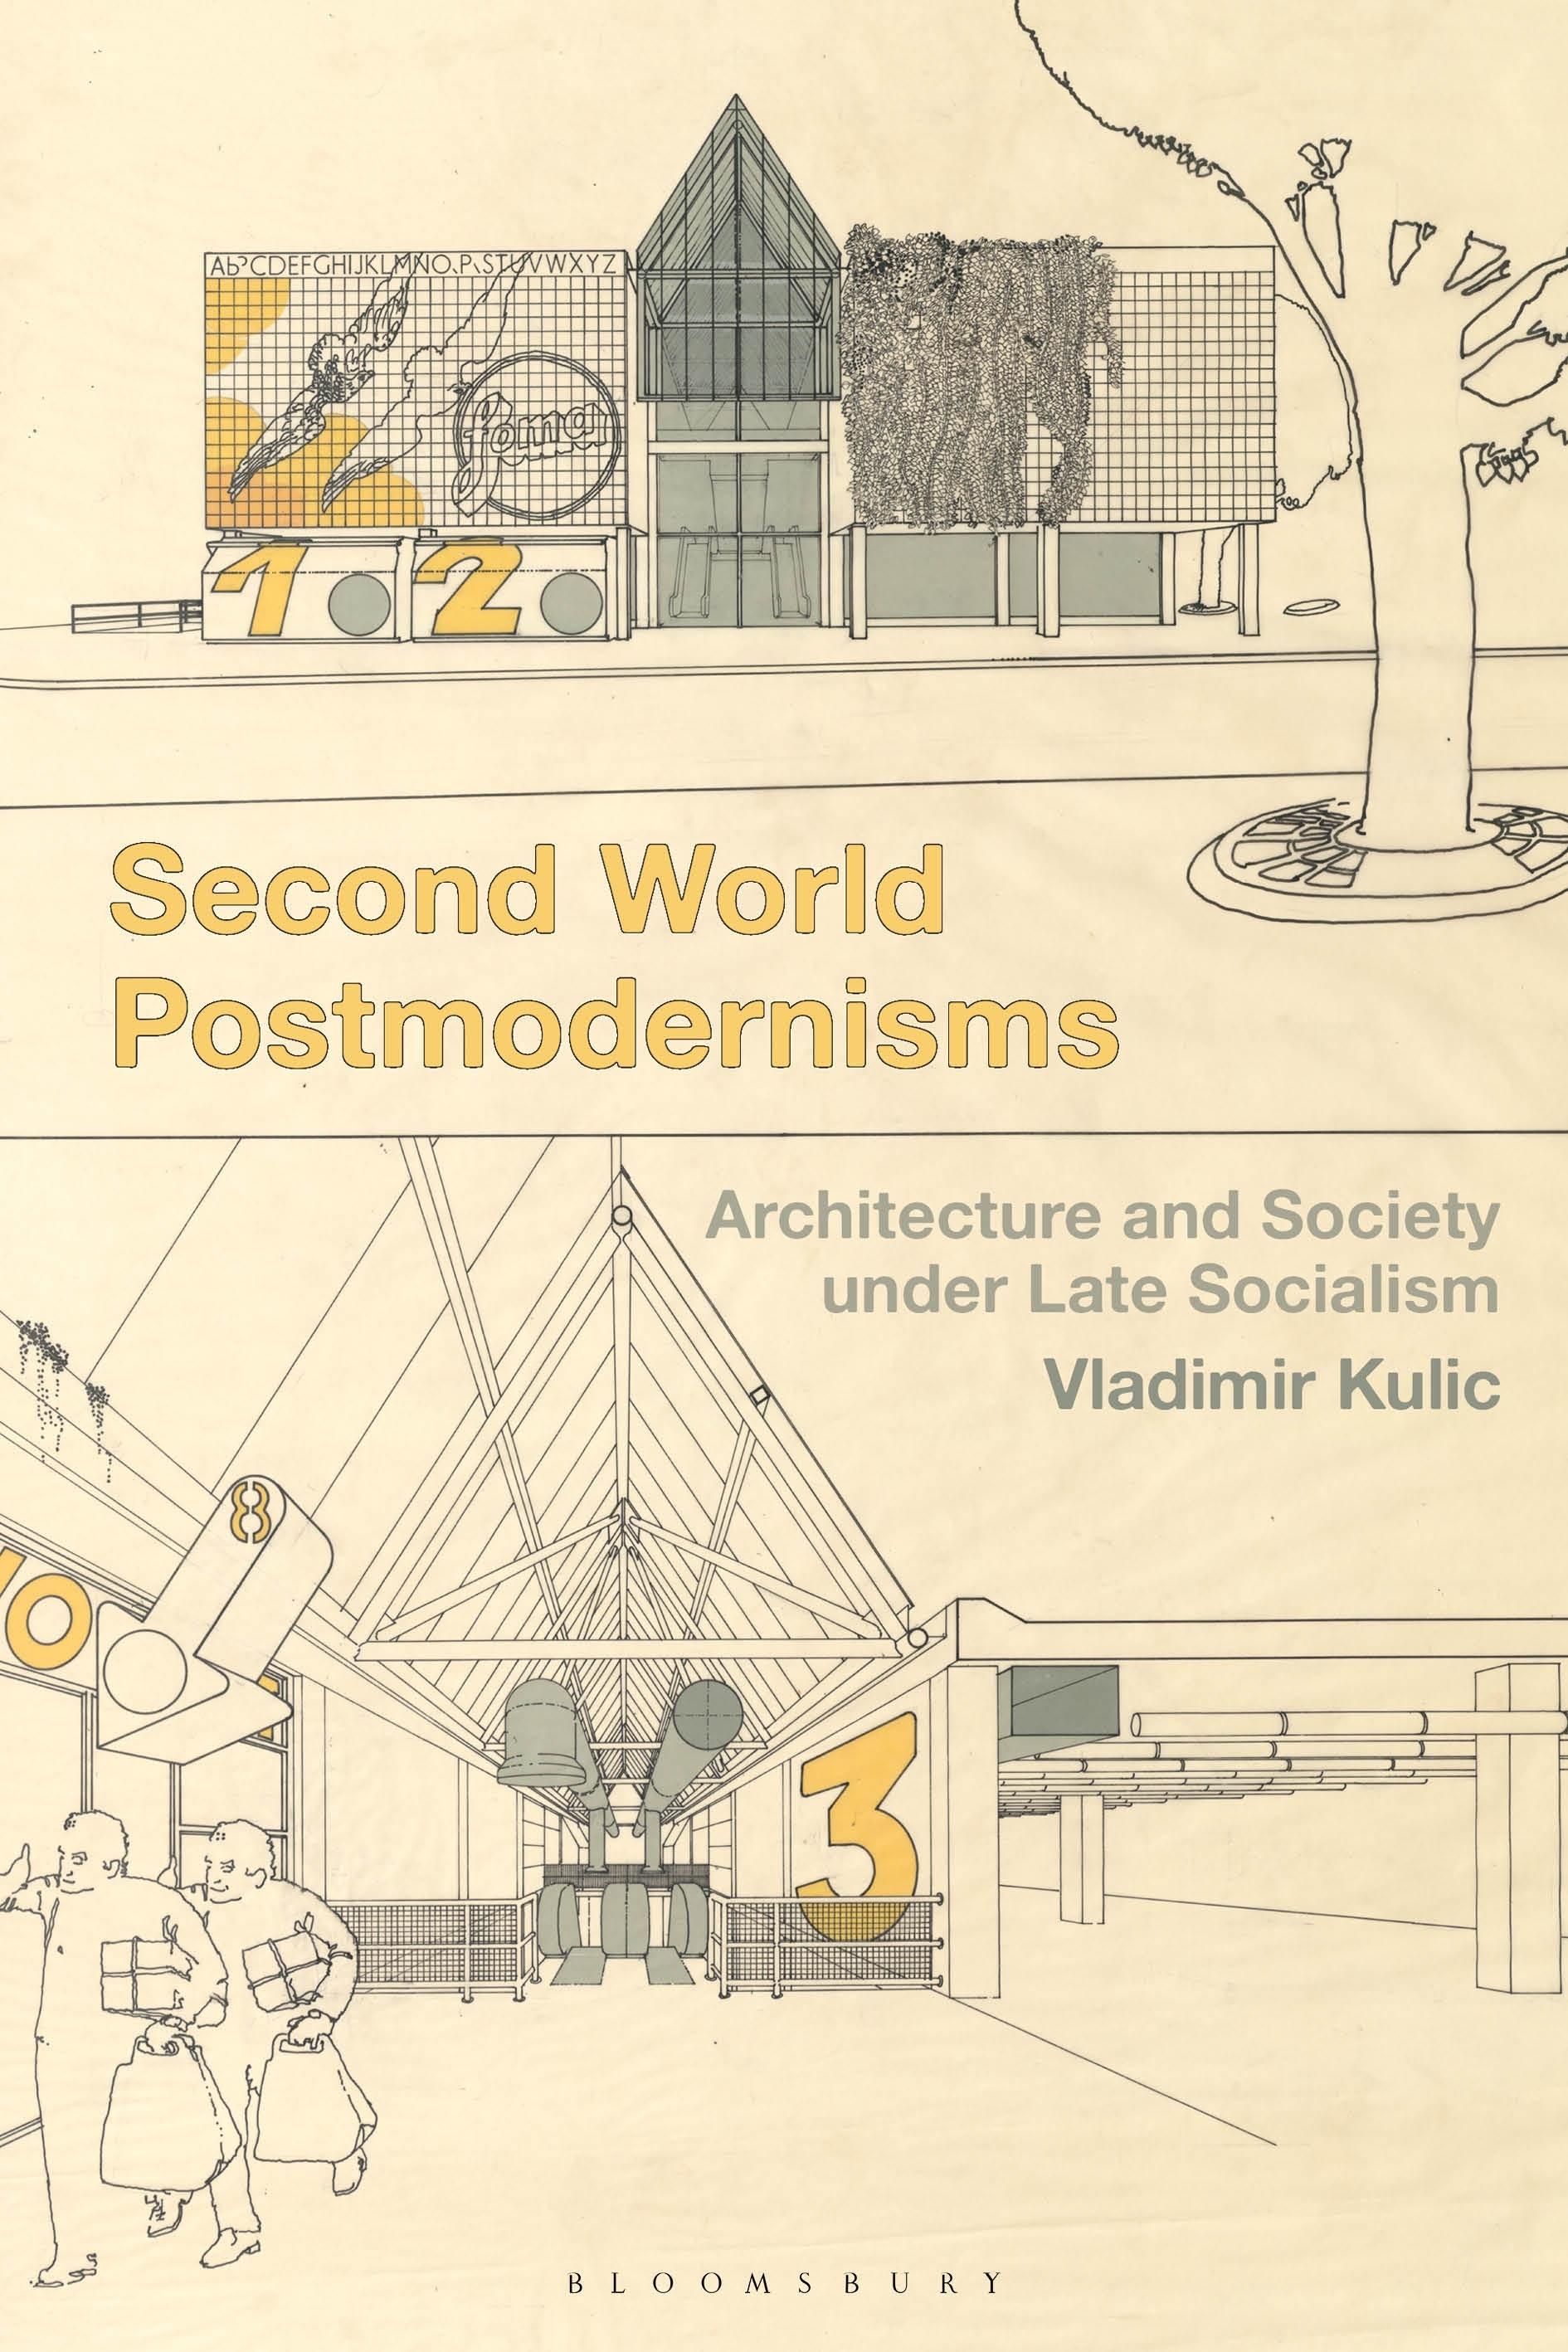 a cover for Second World Postmodernisms: Architecture and Society under Late Socialism